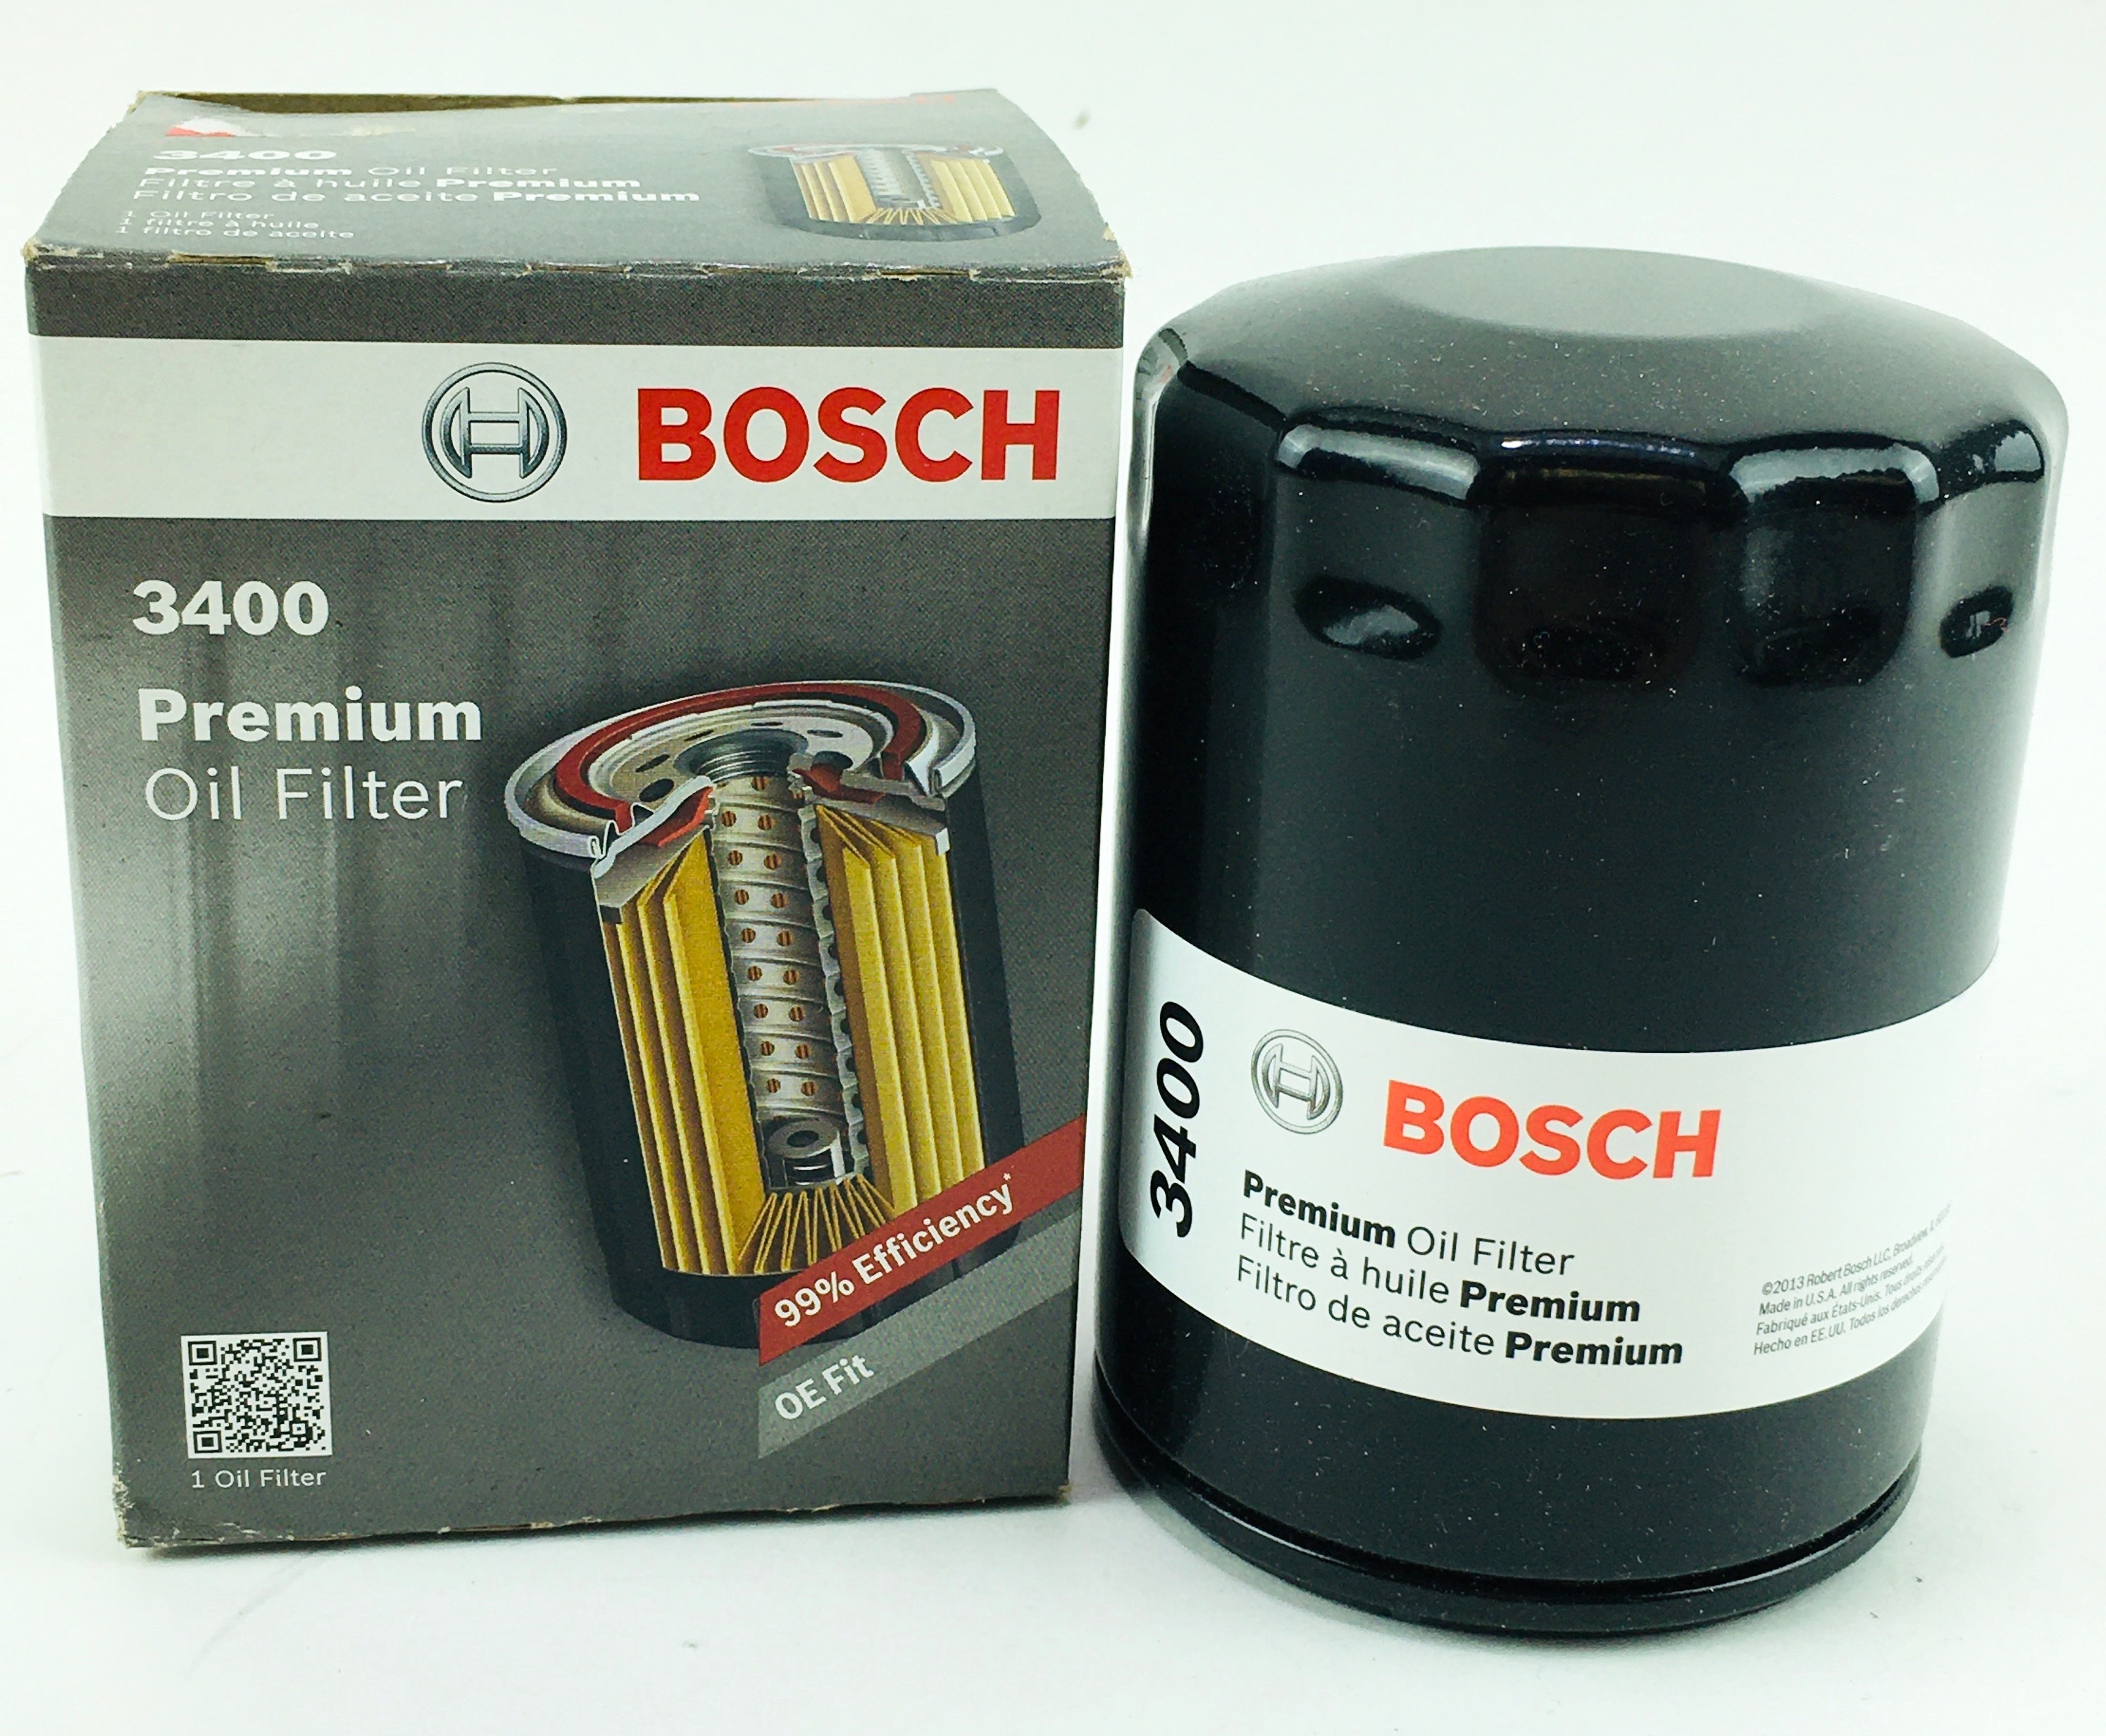 Lot of 6 New Genuine Bosch 3400 Premium Spin-On Engine Oil Filters Free Shipping - image 3